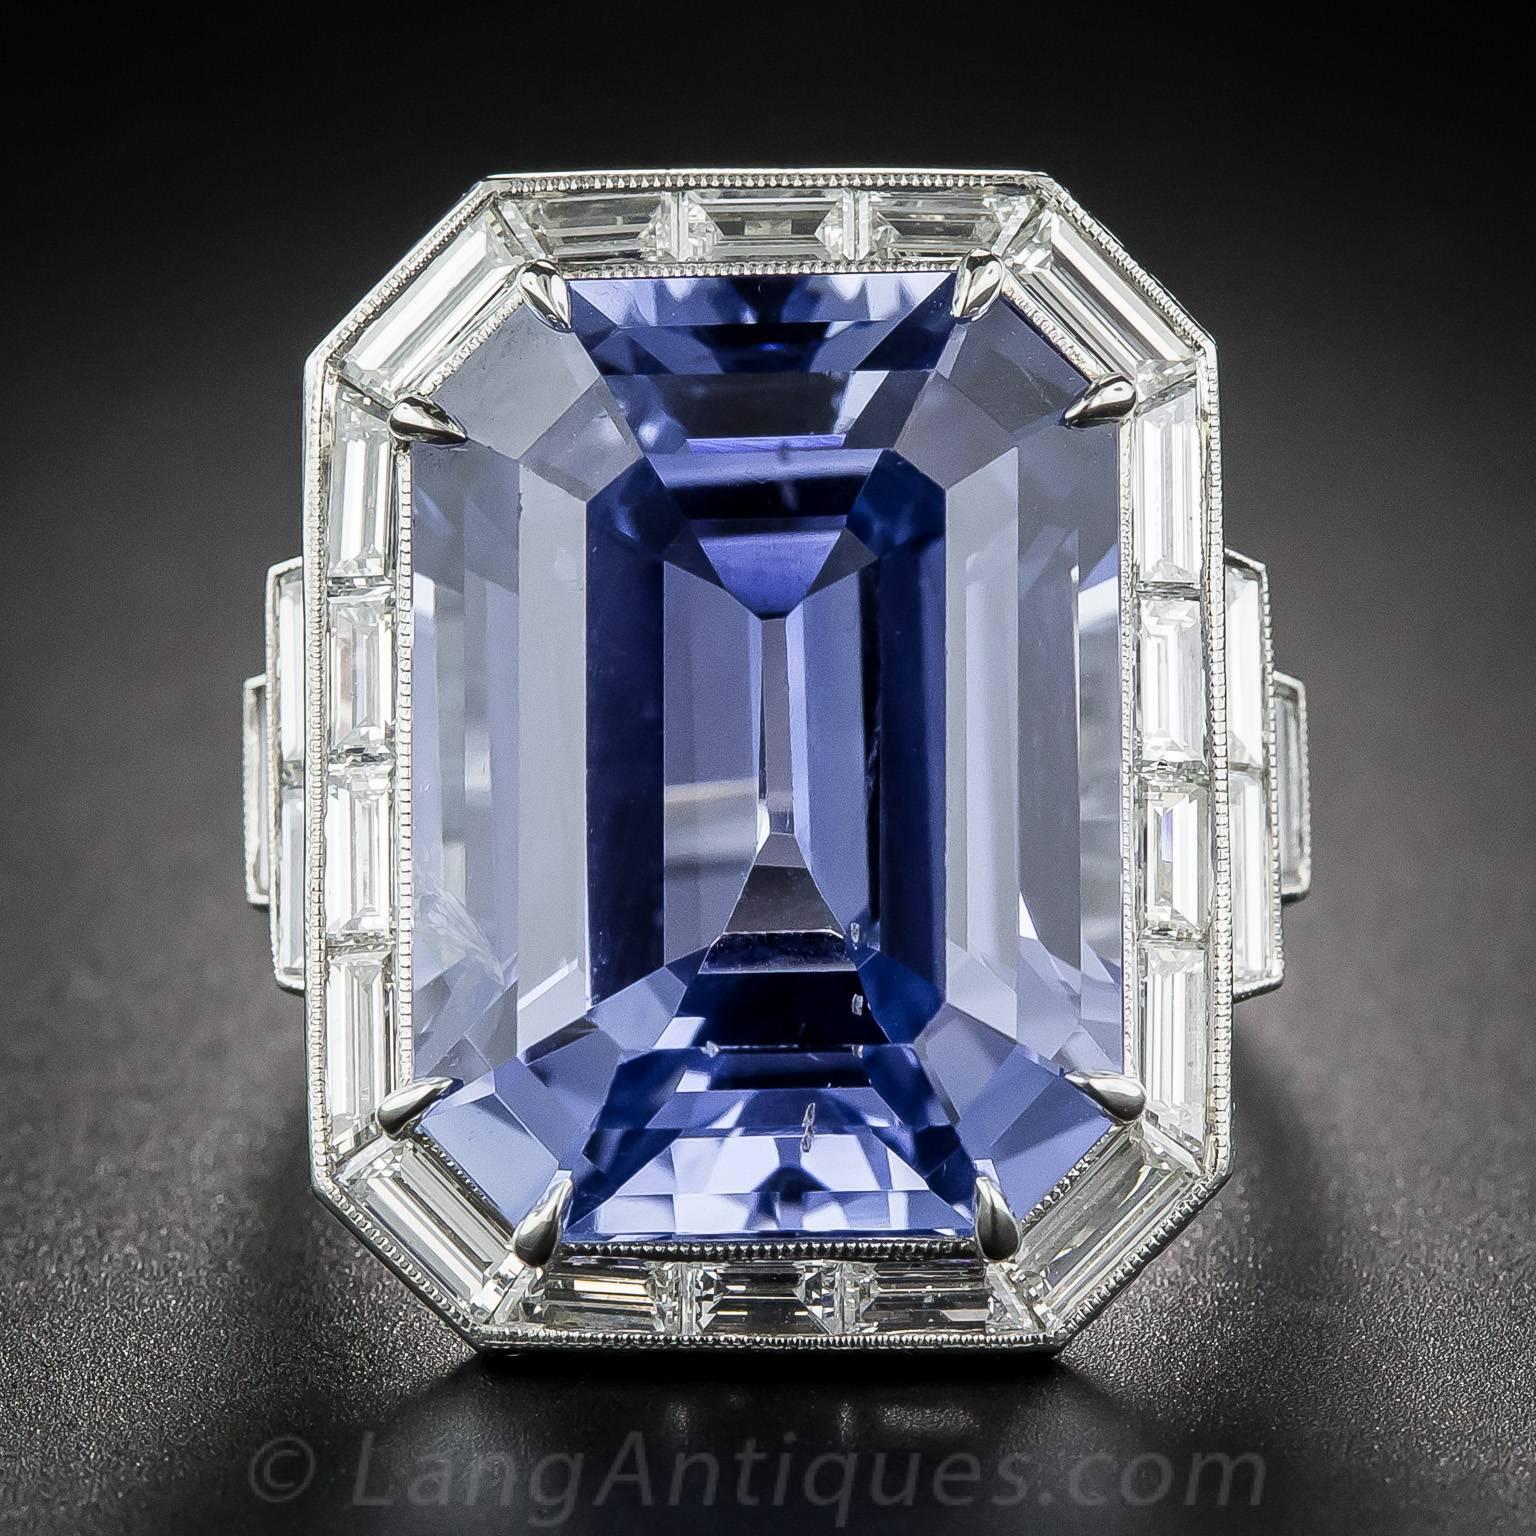 A breathtaking, bright blue emerald-cut sapphire, weighing in at 33.06 carats, radiates brilliantly from within a platinum frame of custom-cut baguette diamonds in this singular, sensational and sizable showstopper. The gorgeous gemstone is of